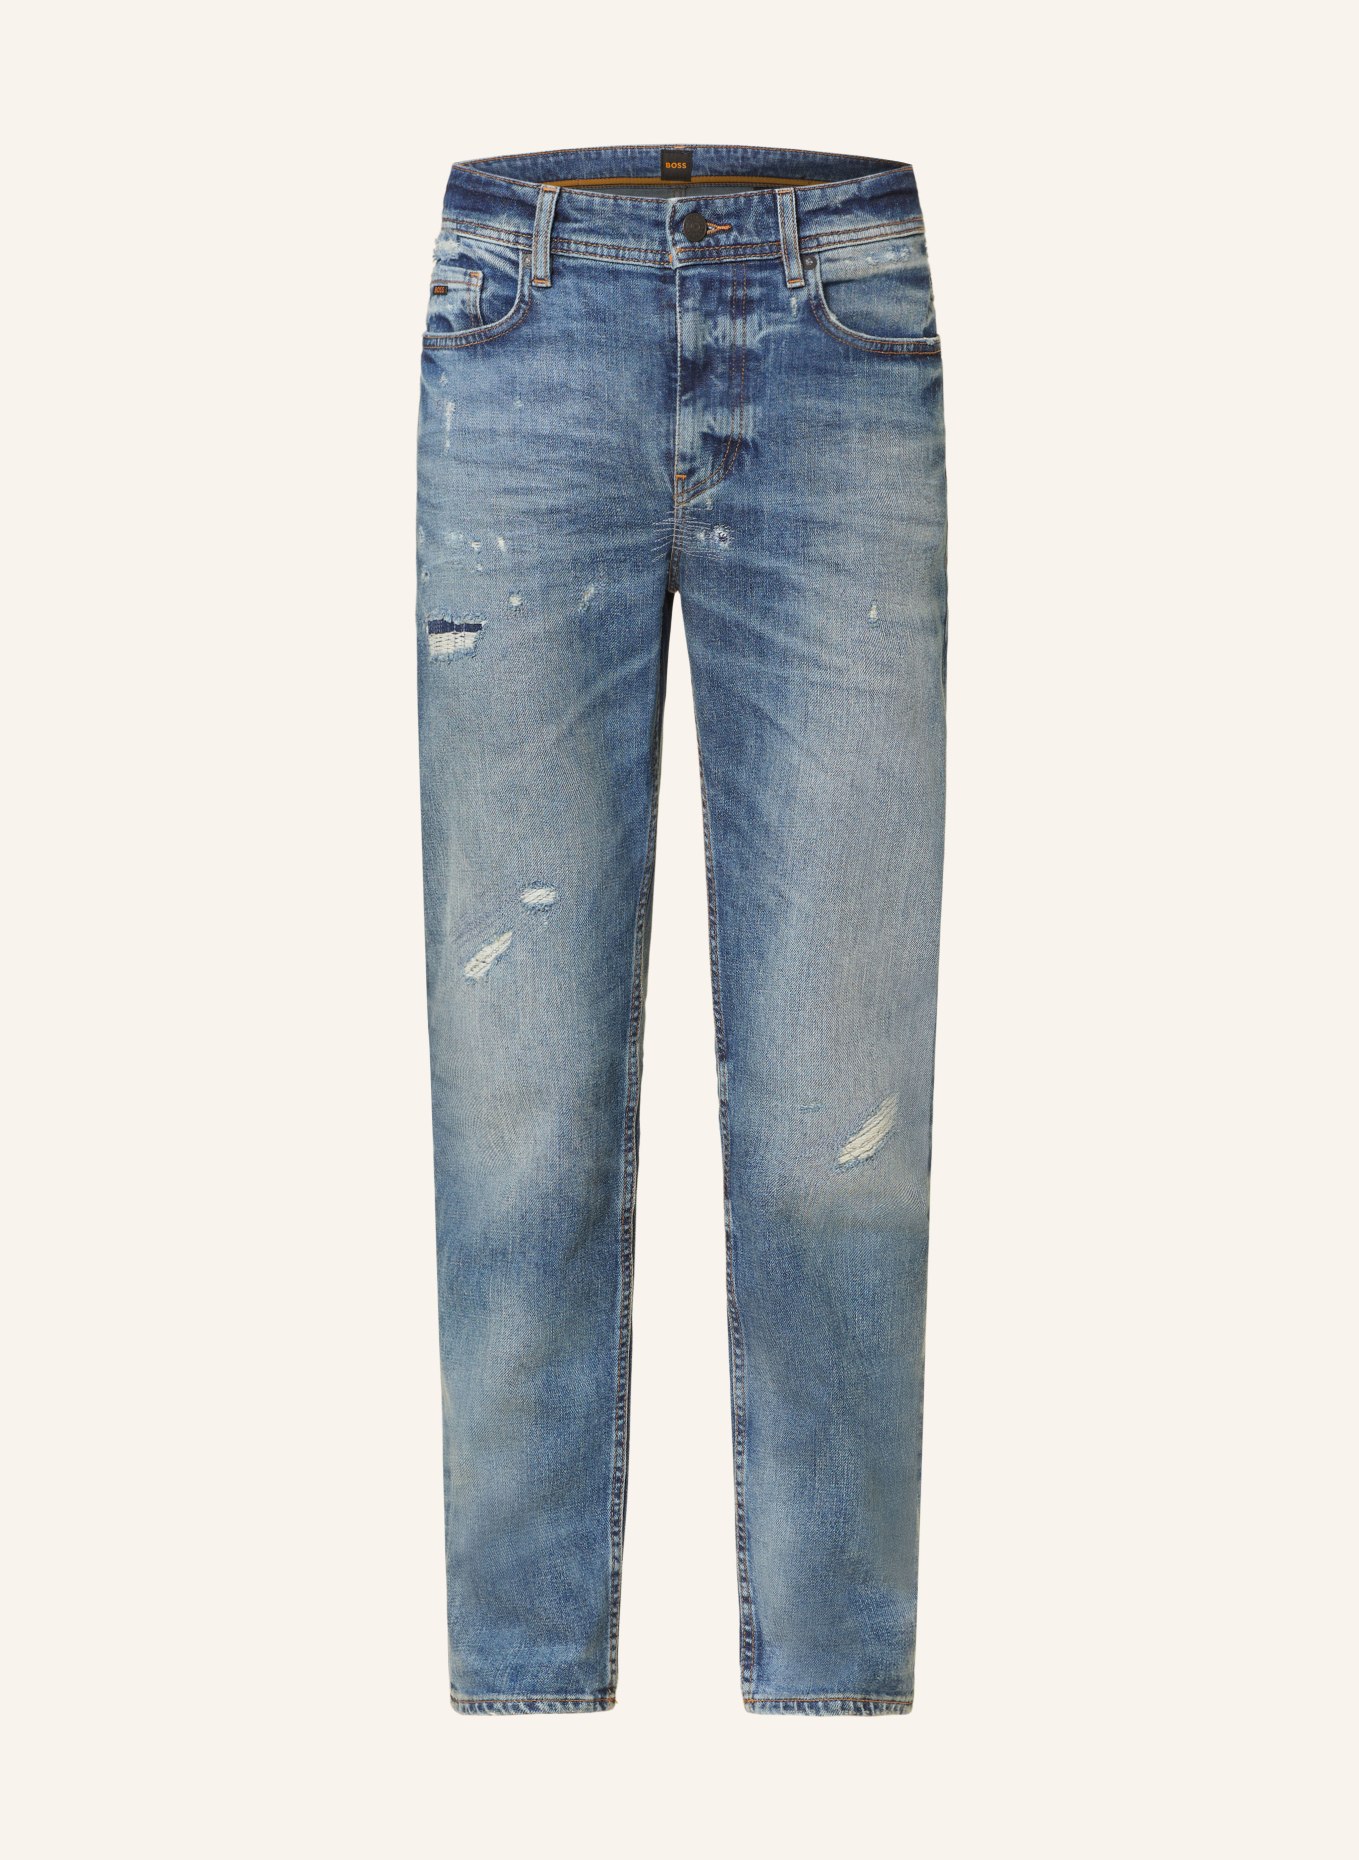 BOSS Destroyed Jeans TABER Tapered Fit, Farbe: 432 BRIGHT BLUE (Bild 1)